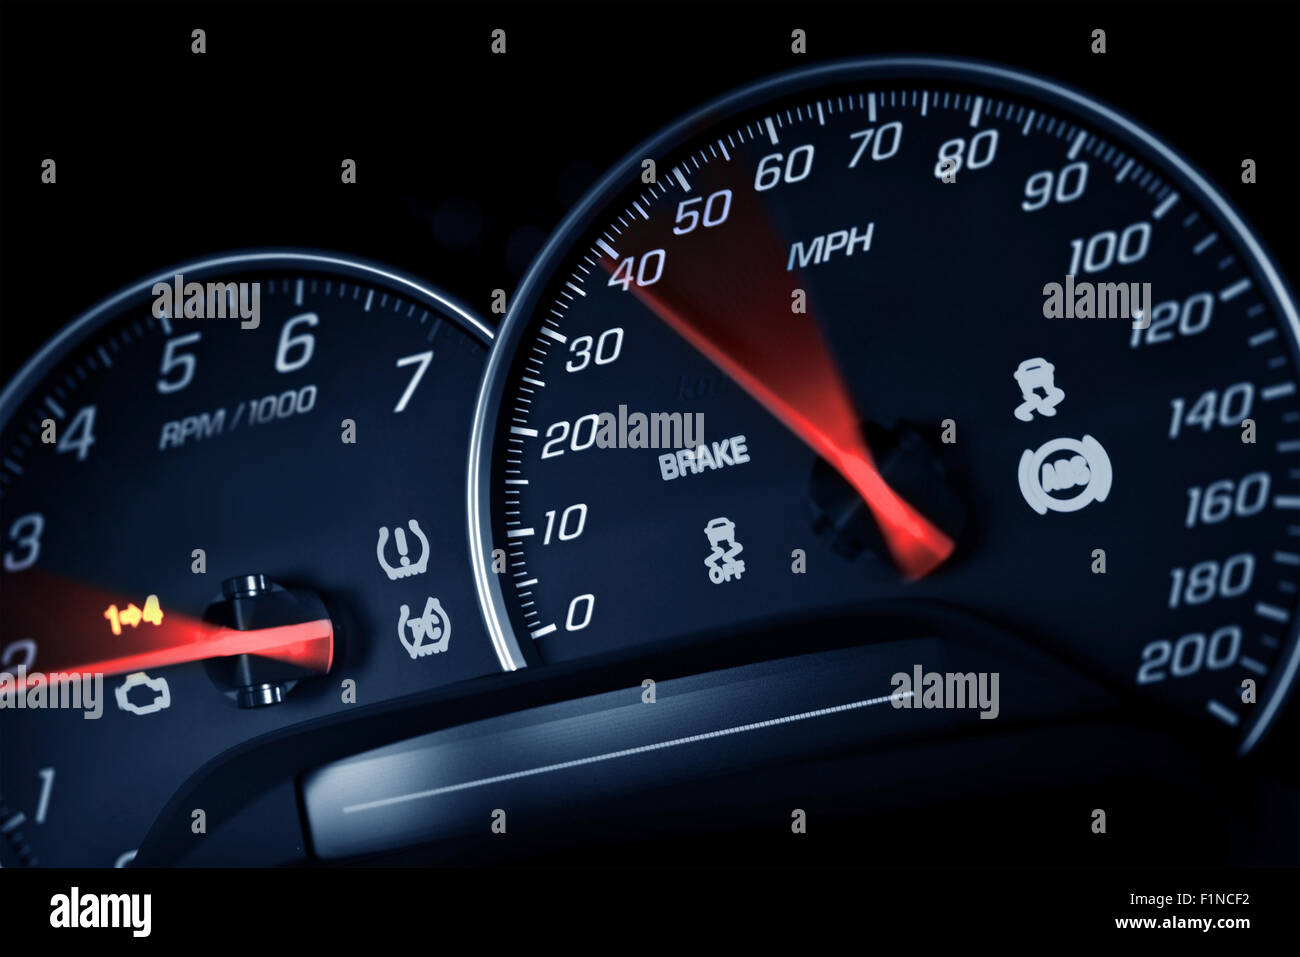 Sporty Speedometer. Sports Car Instruments Dash/Panel Closeup. RPM and Speed Metering. Transportation Photo Collection. Stock Photo